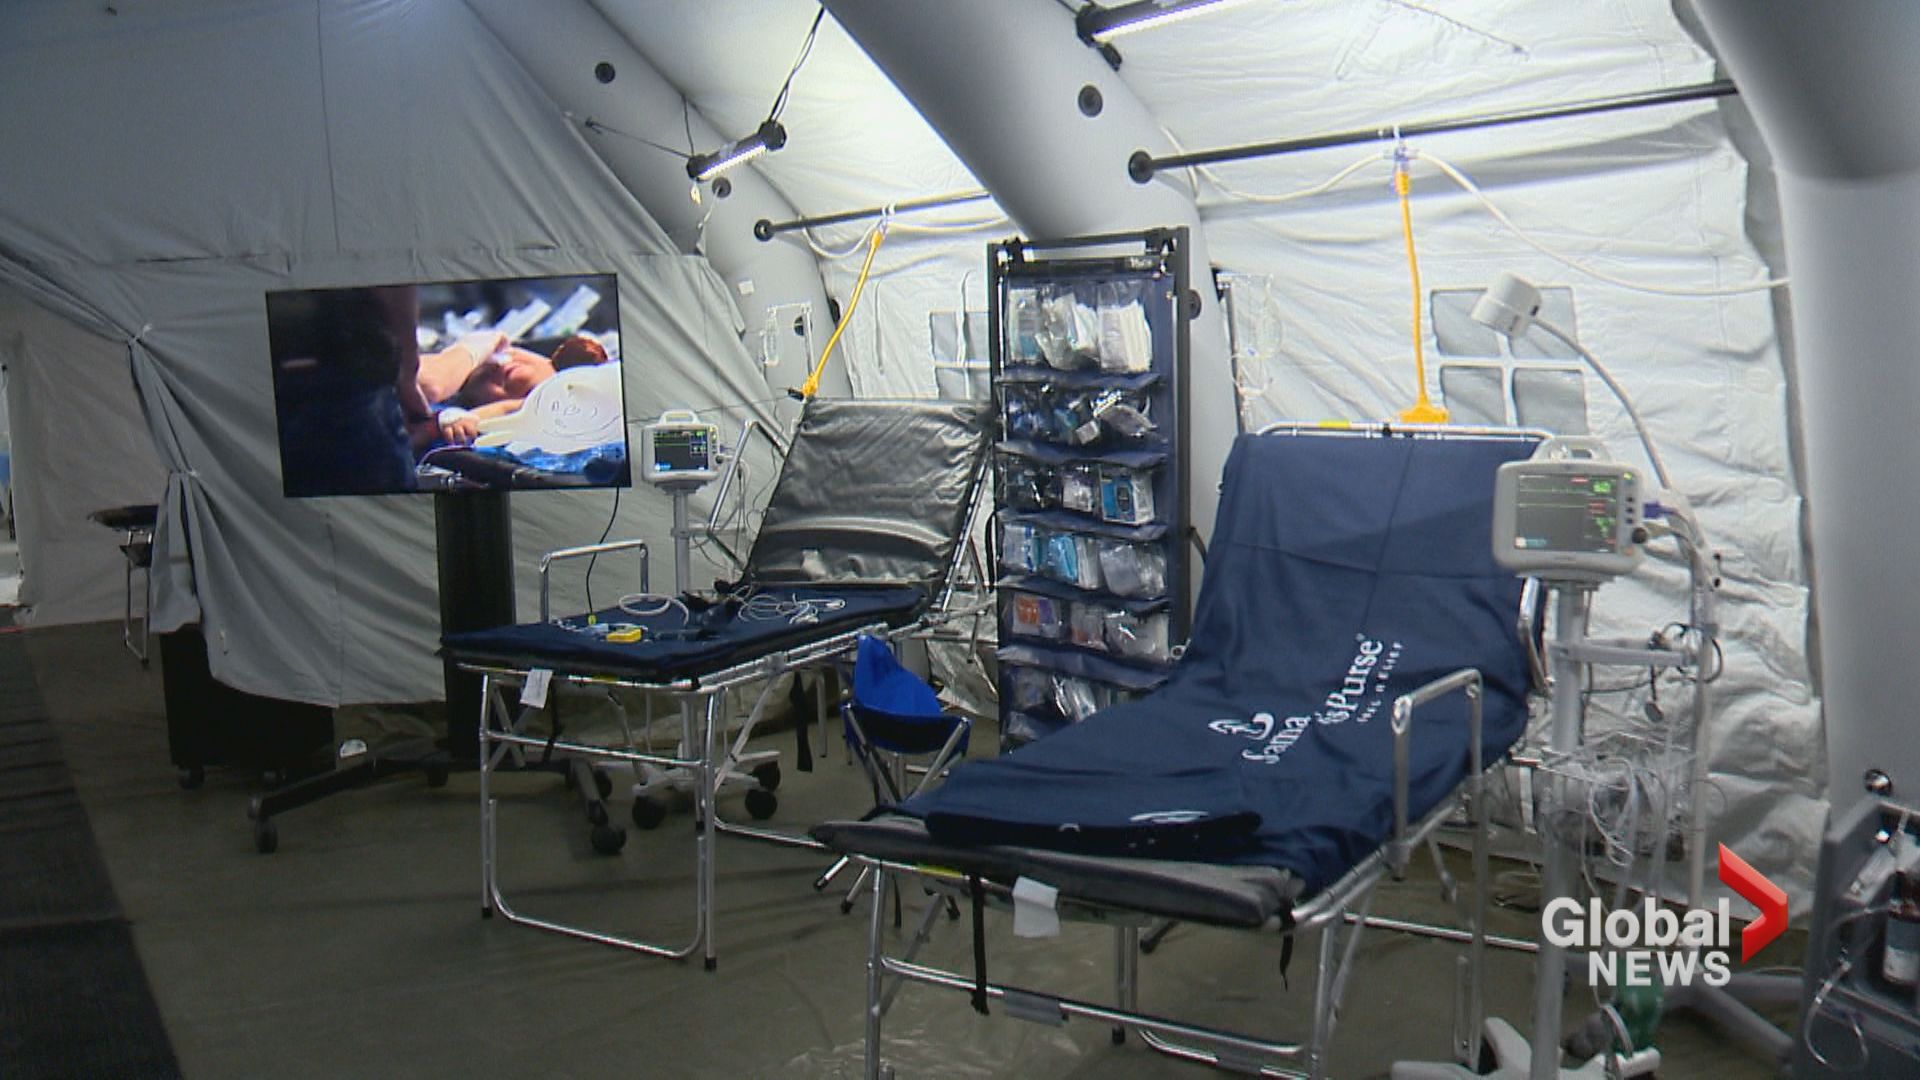 Calgary airport home to new emergency field hospital